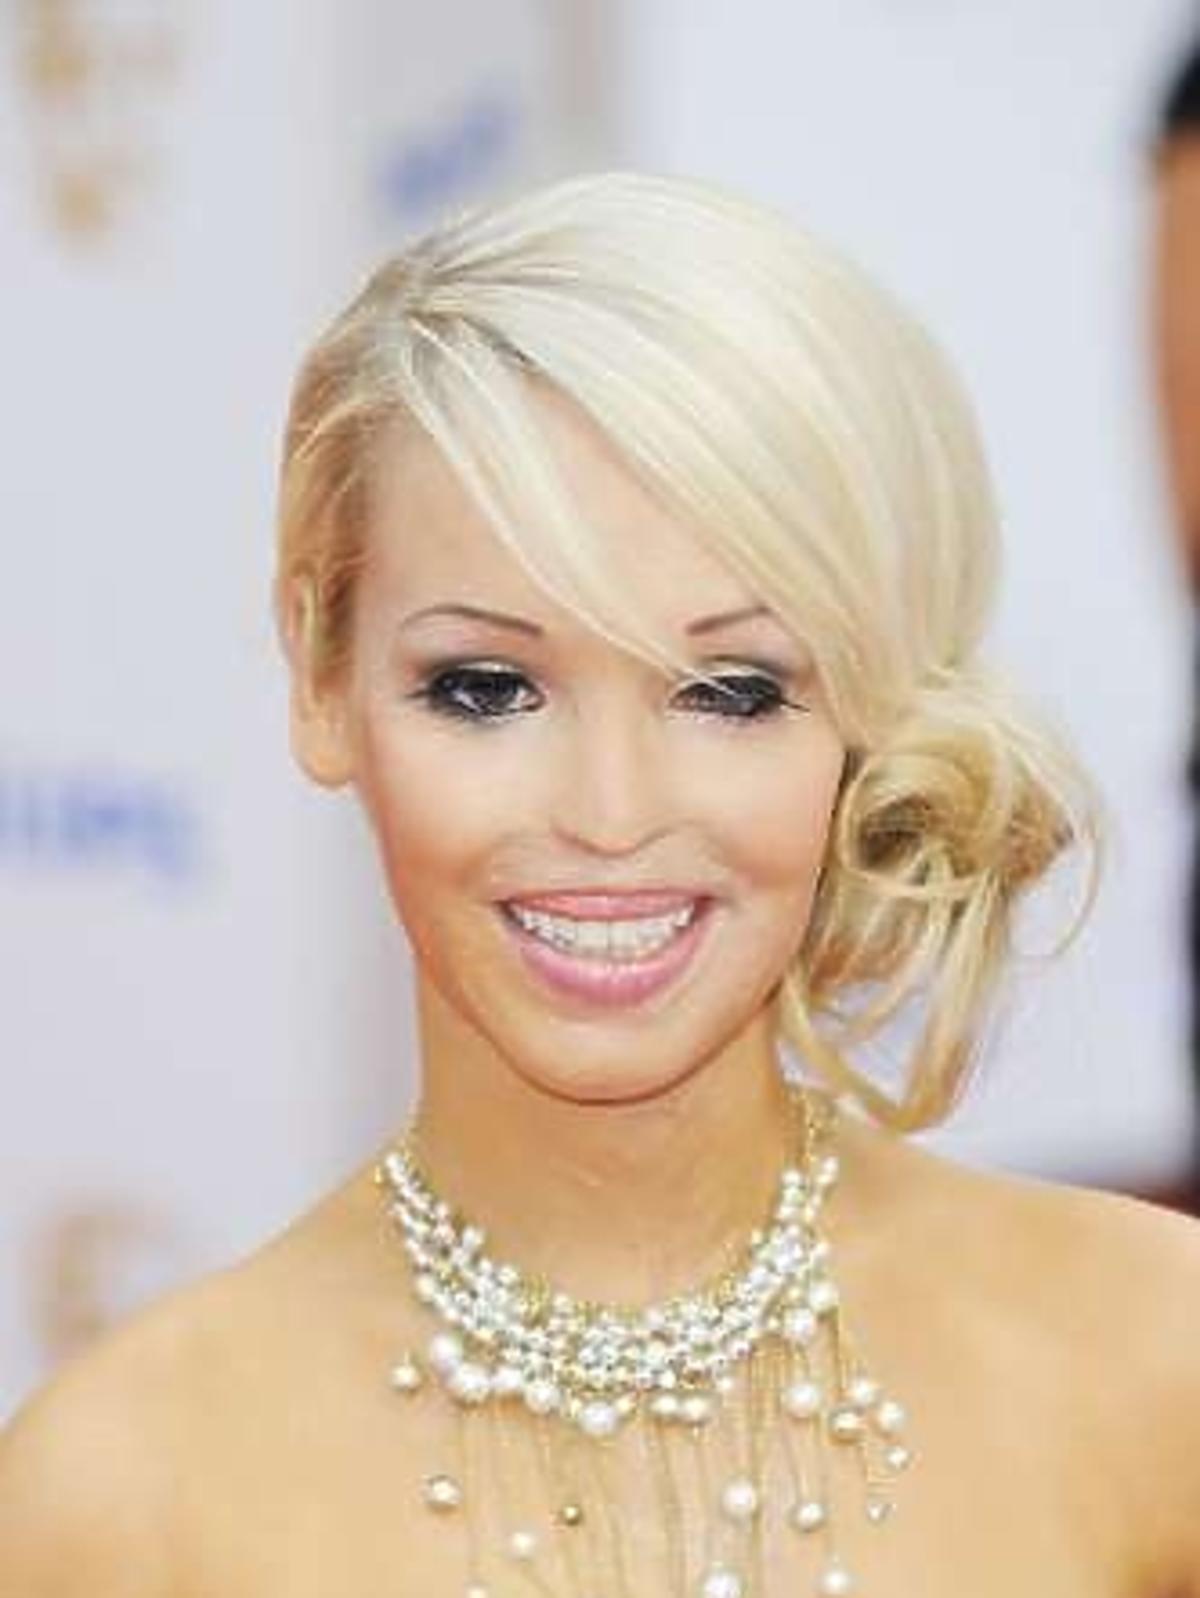 ALLONS_910614_preview_Katie Piper.jpg